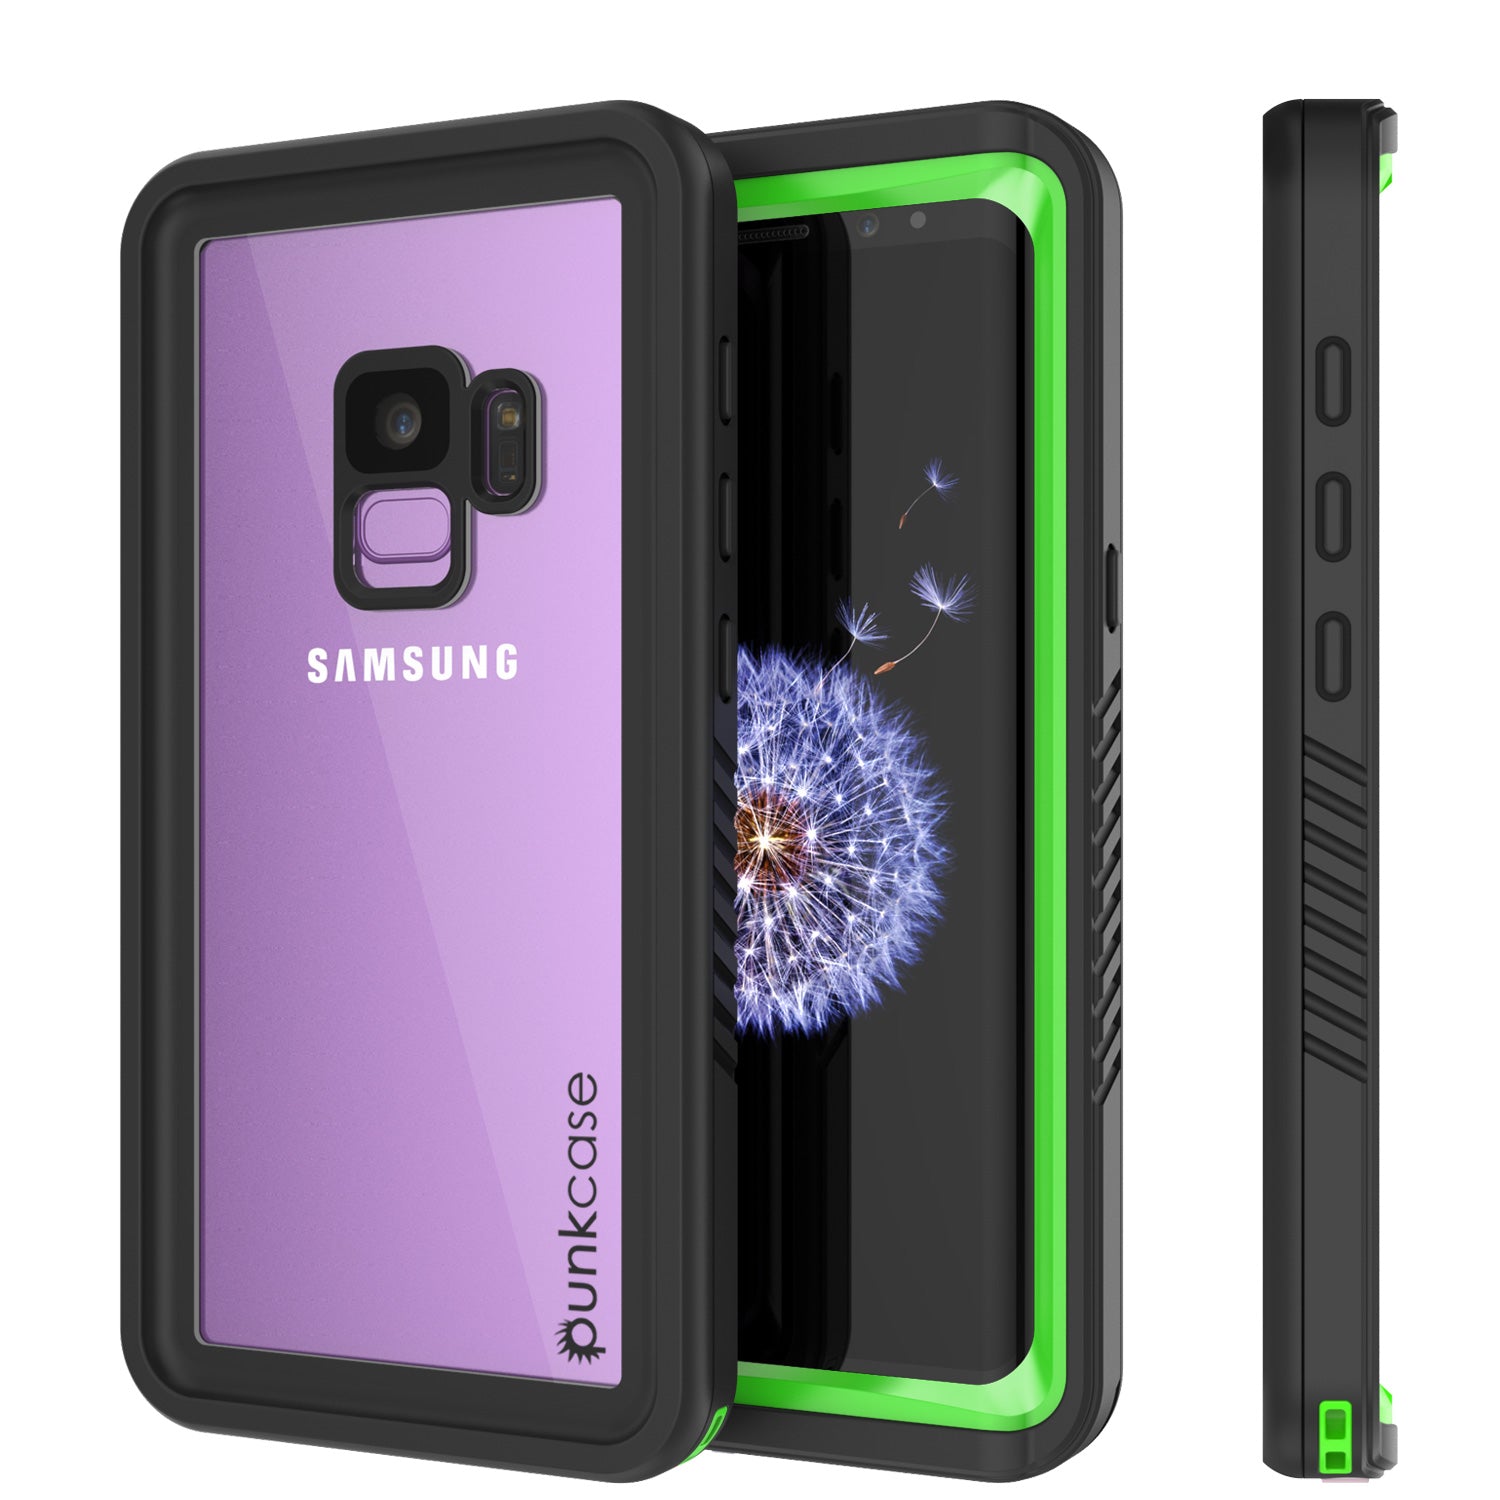 Galaxy S9 Waterproof Case, Punkcase [Extreme Series] [Slim Fit] [IP68 Certified] [Shockproof] [Snowproof] [Dirproof] Armor Cover W/ Built In Screen Protector for Samsung Galaxy S9 [Light Green]